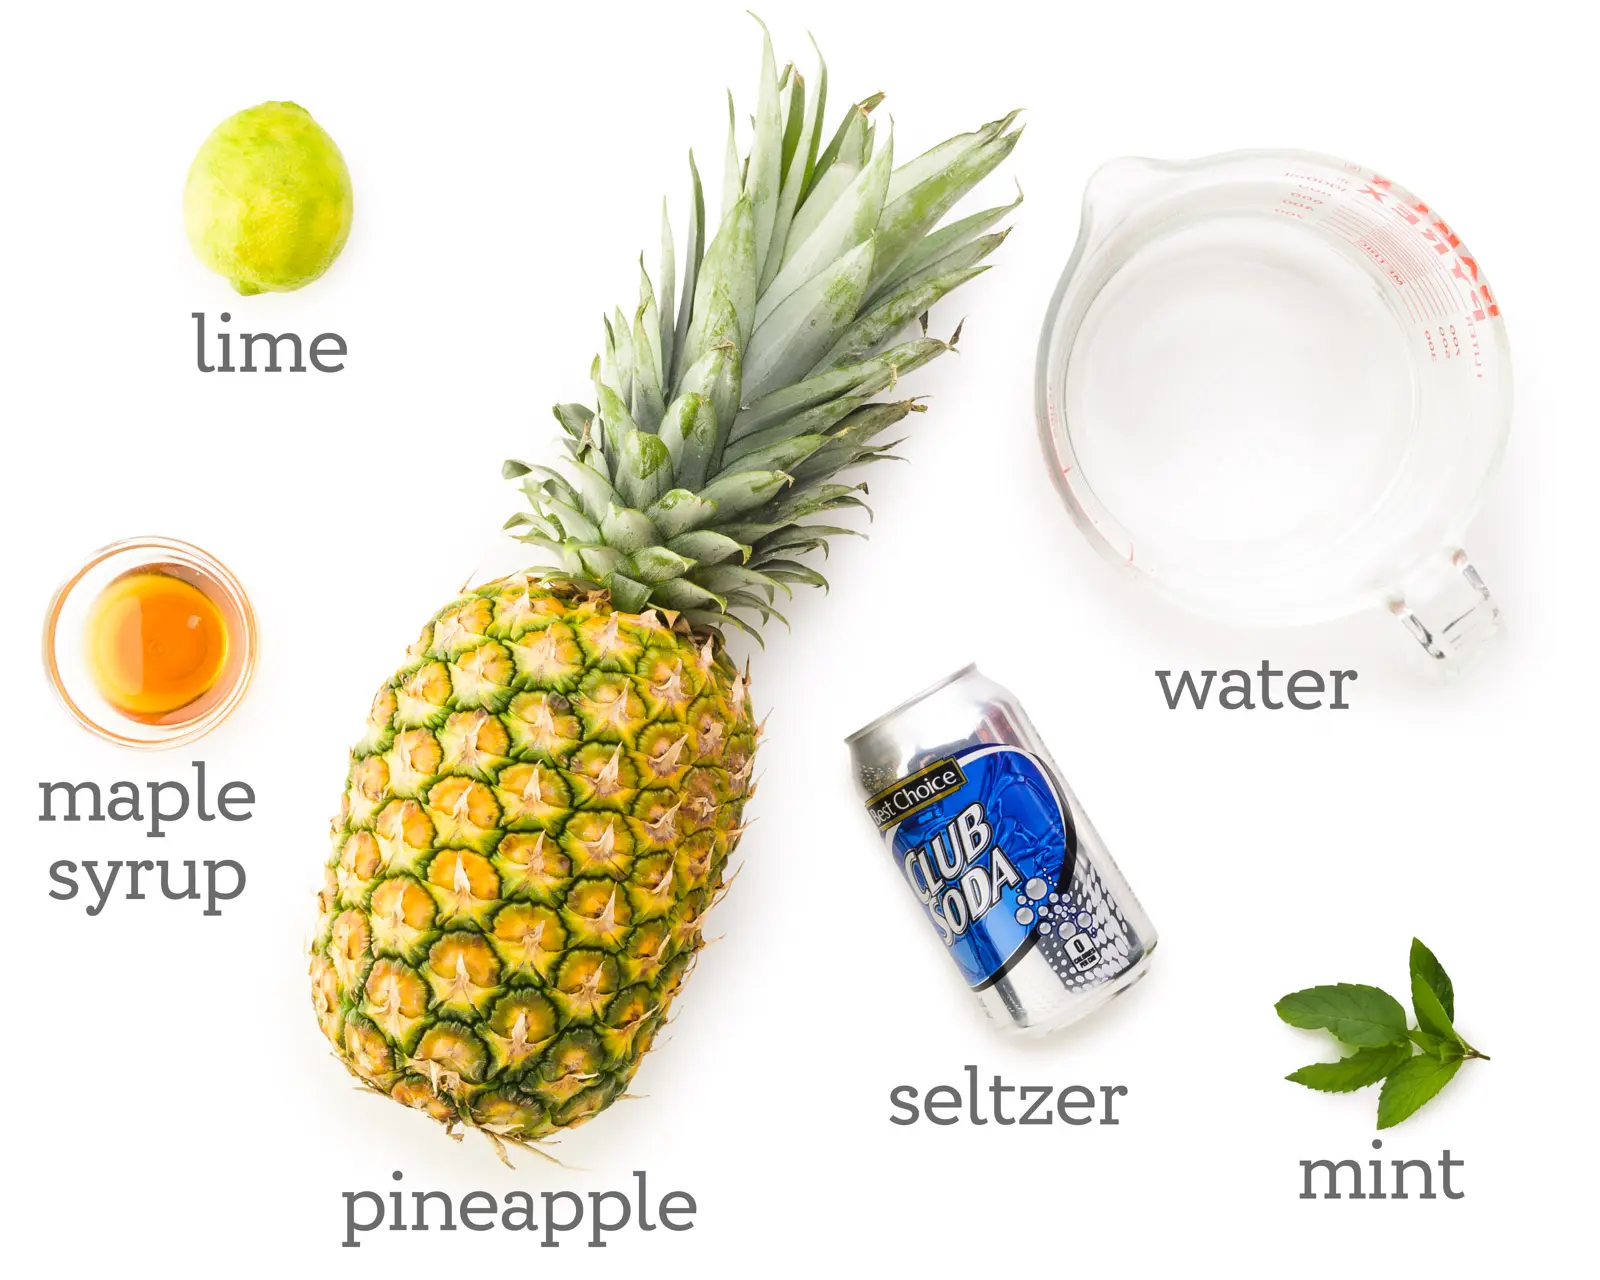 Ingredients are laid out on a white table. The labels next to them read, water, mint, seltzer, pineapple, maple syrup, and lime.